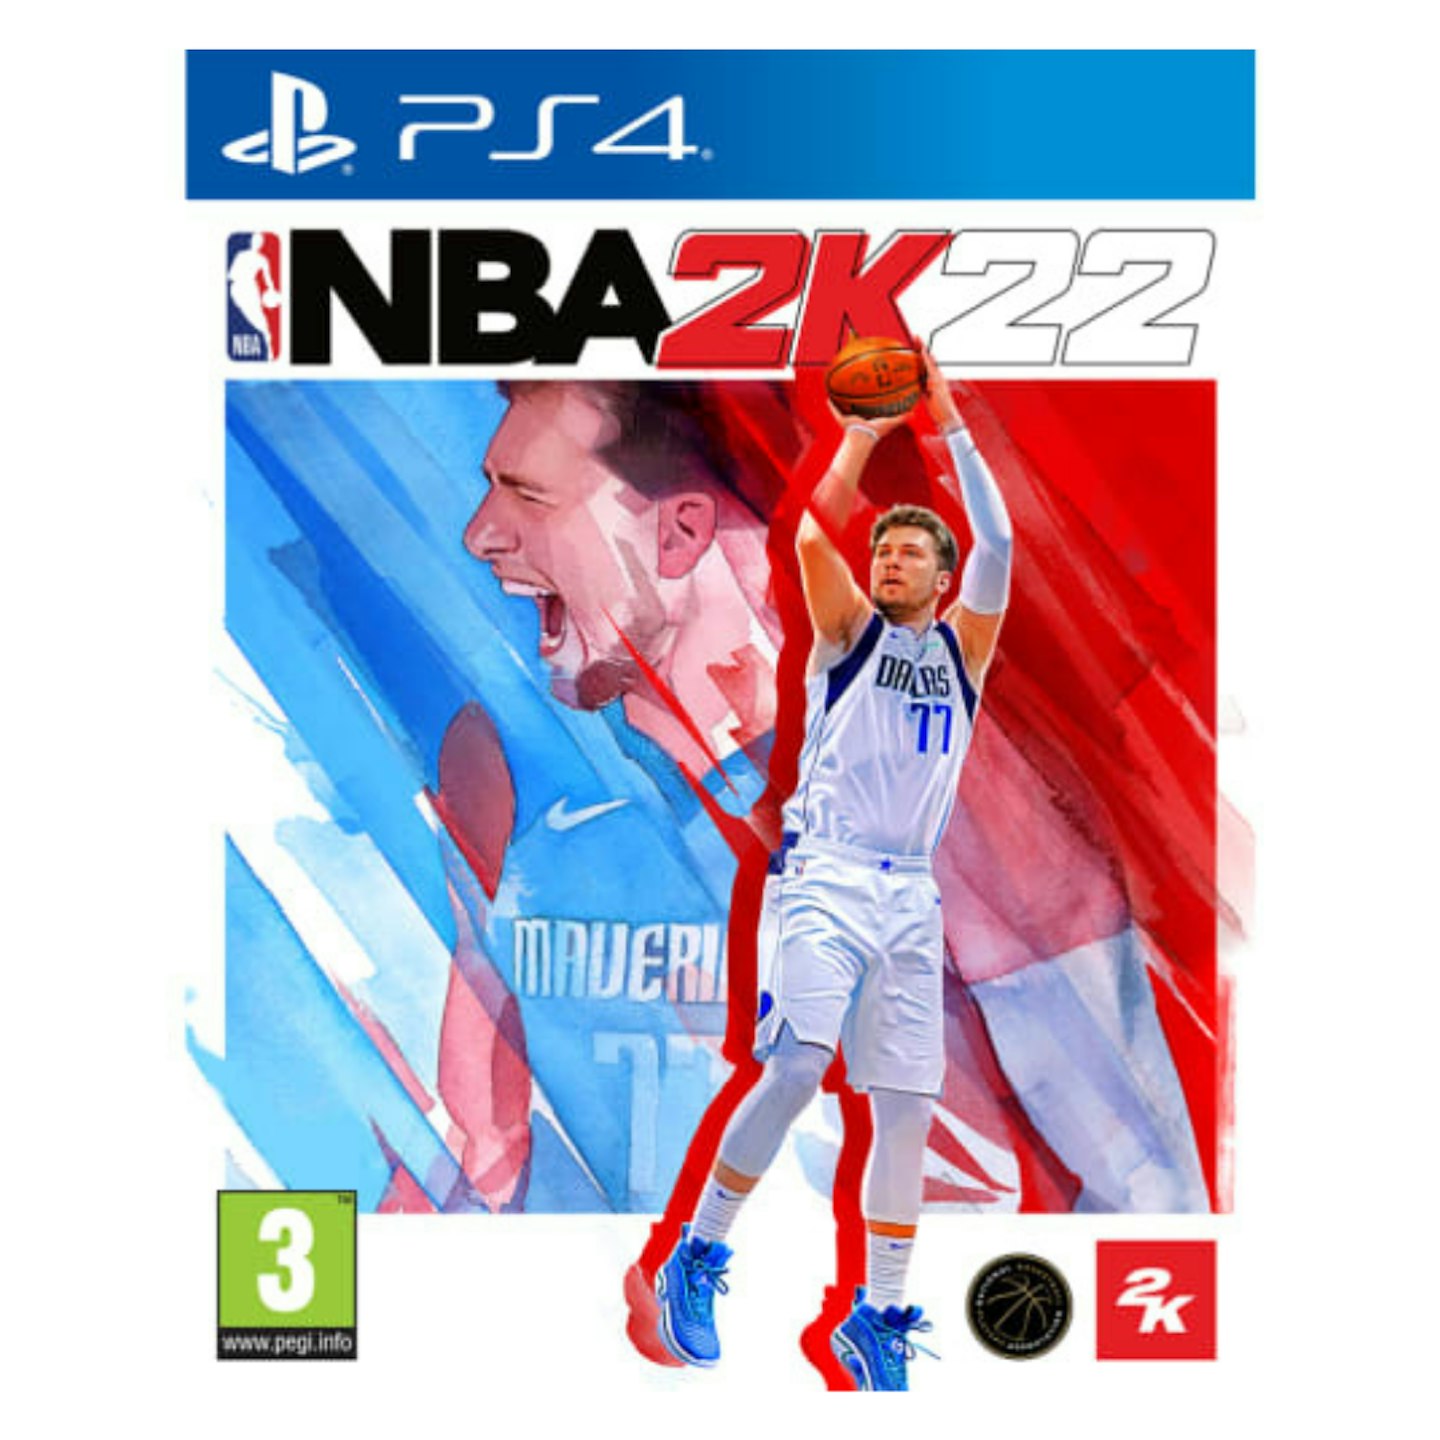 NBA 2K22 With GAME Exclusive Pre-order Bonuses - PS4